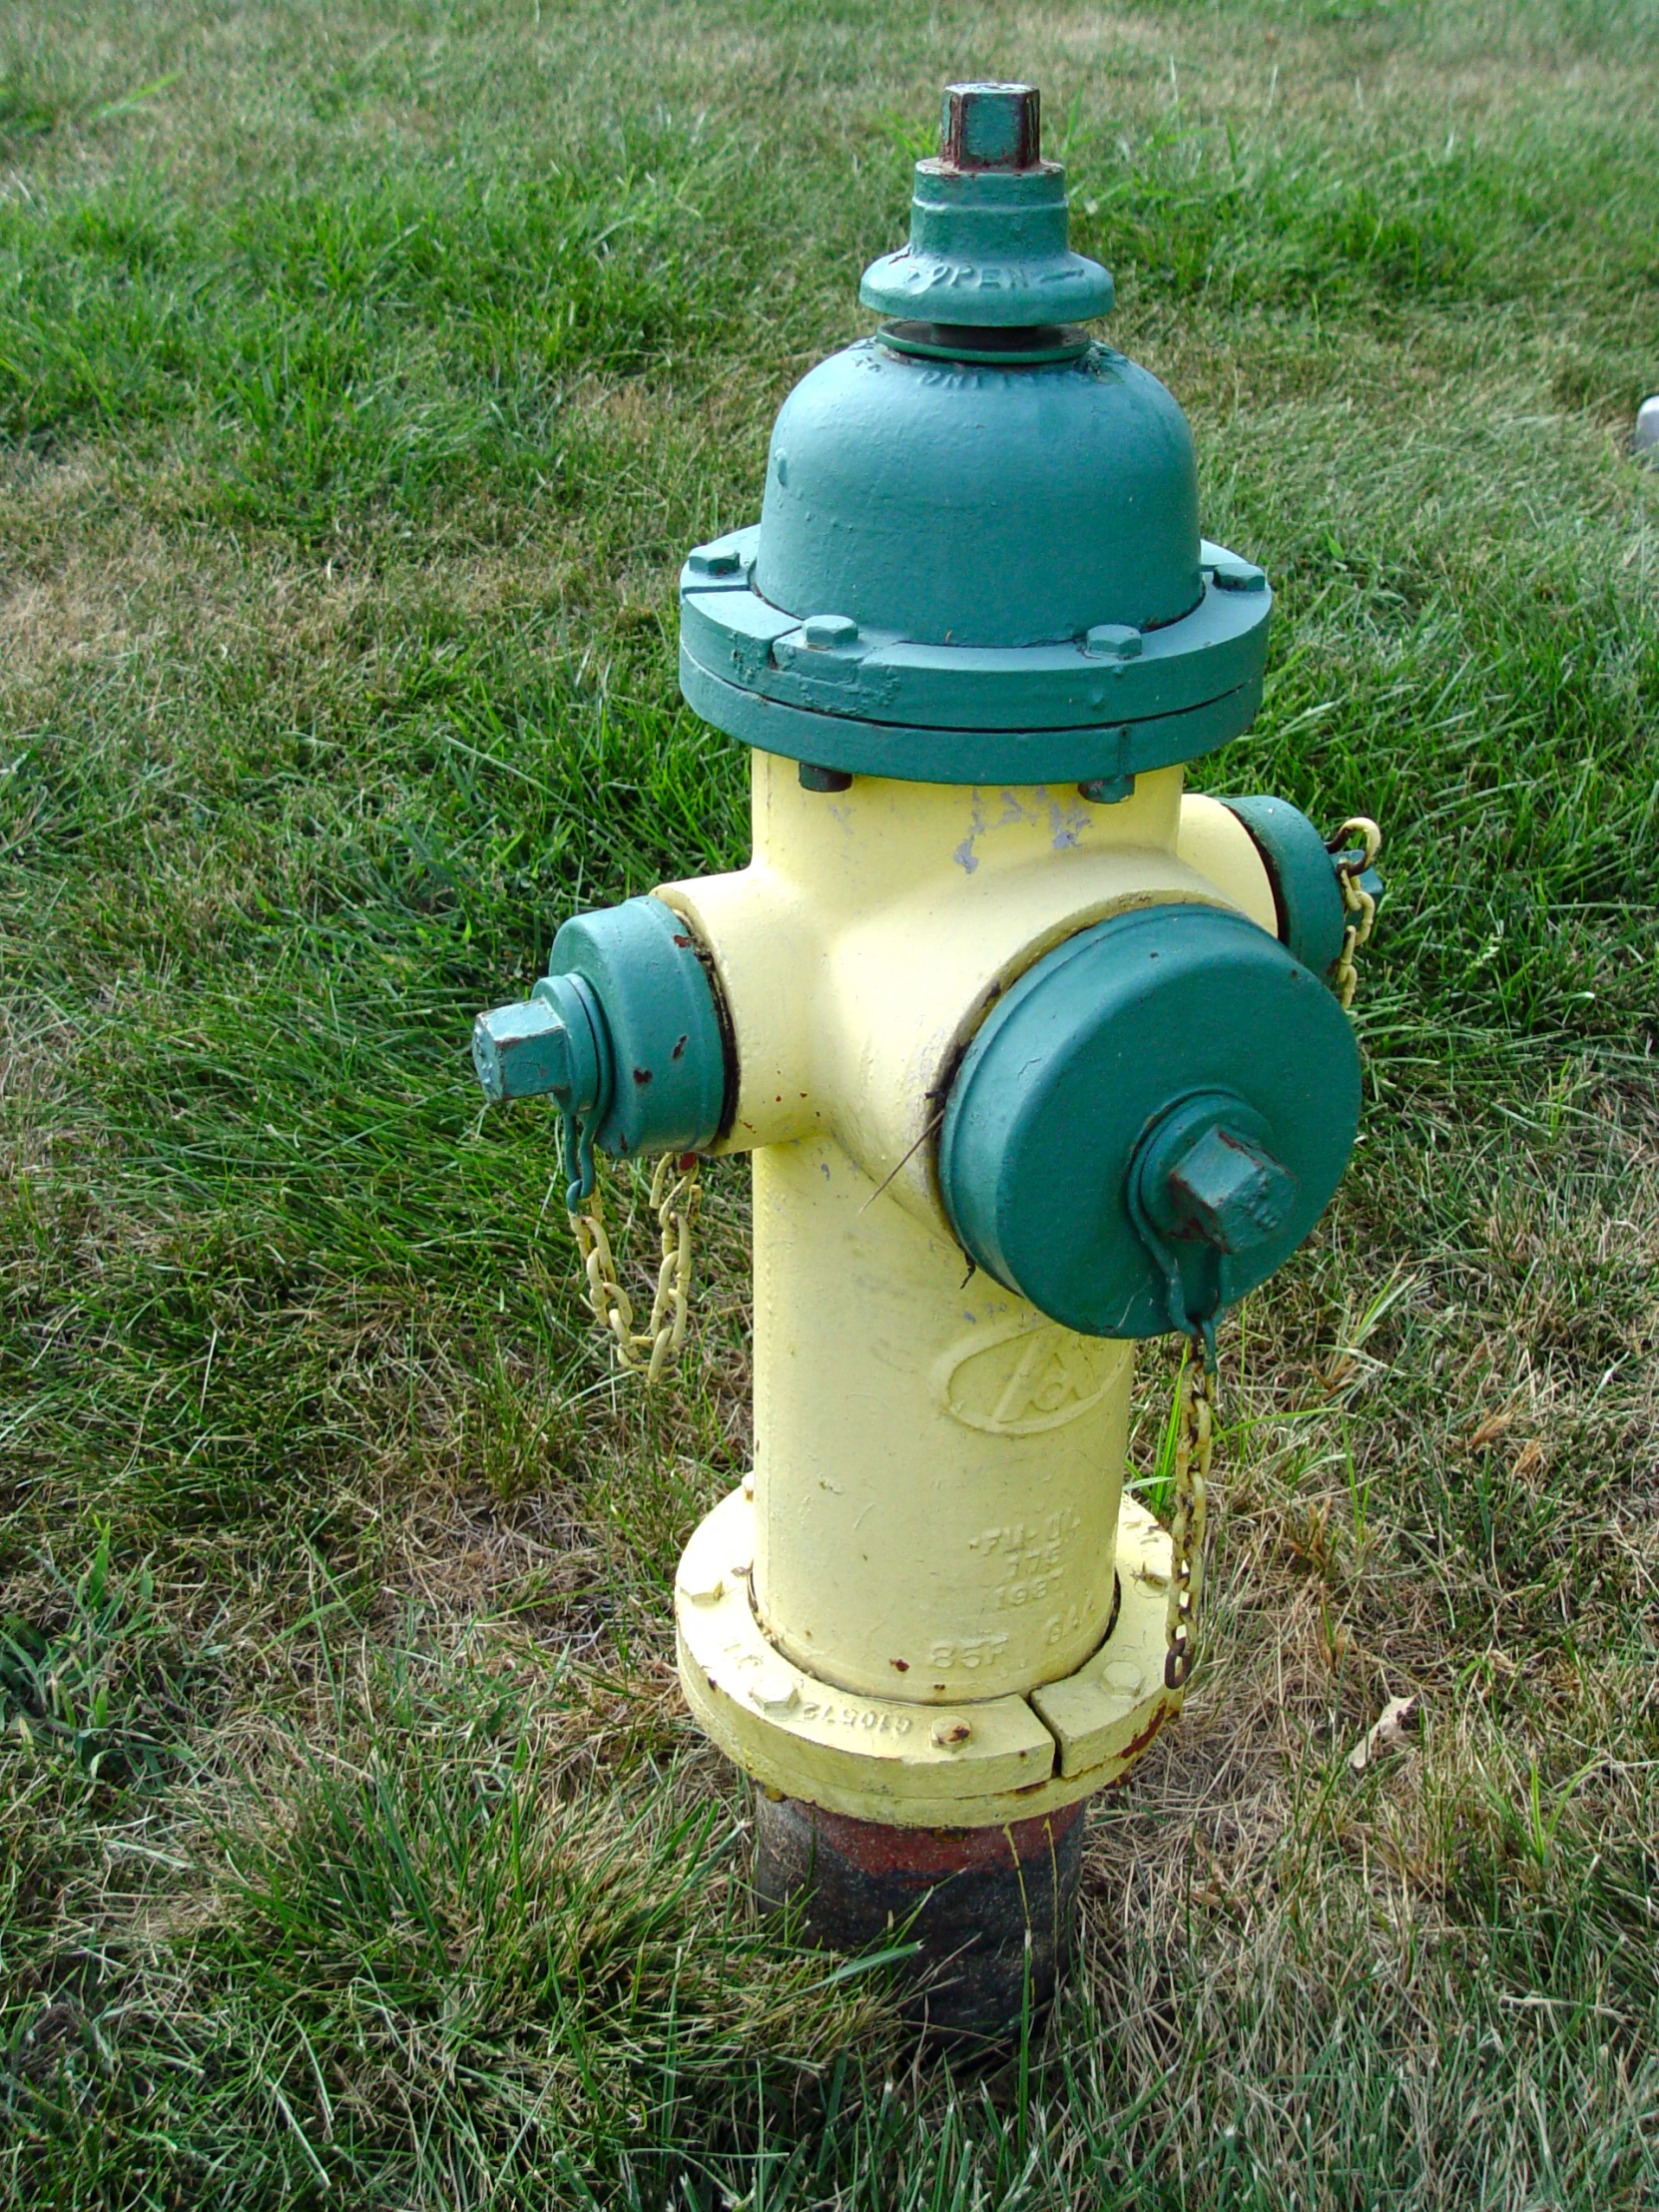 an old green and yellow fire hydrant in grassy field